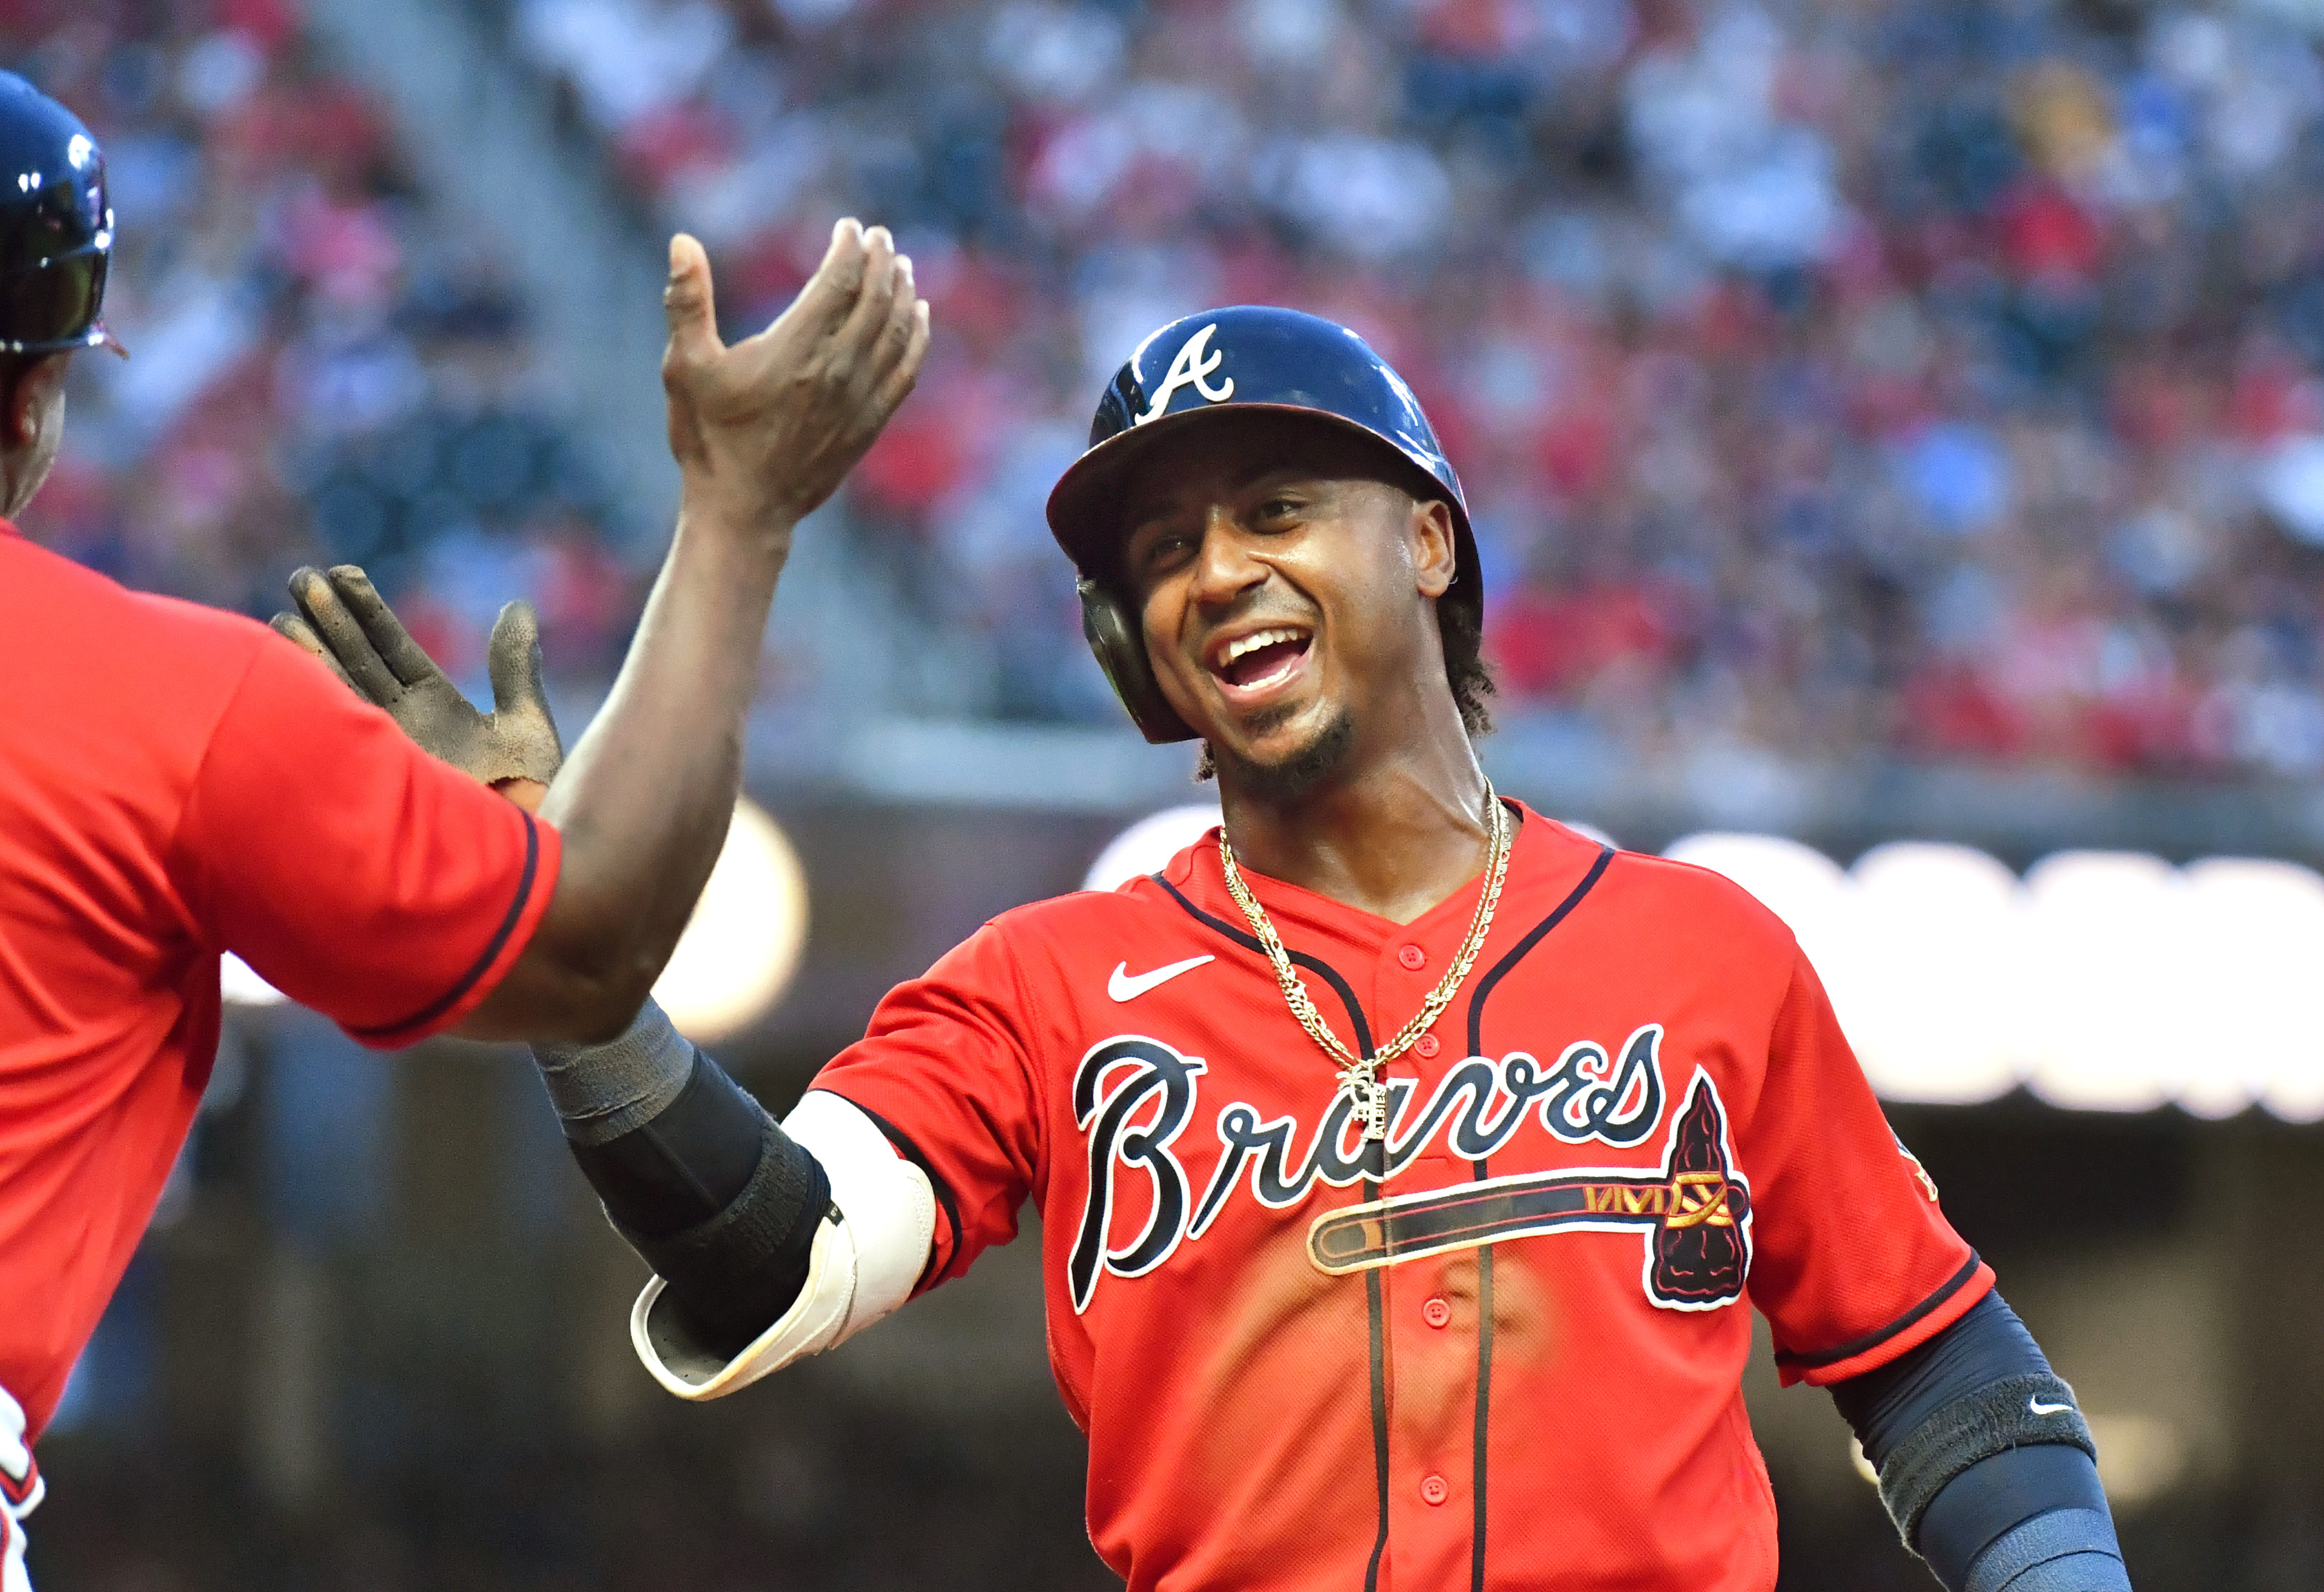 Ozzie Albies shouldn't be overlooked in the young dynamic-player  conversation